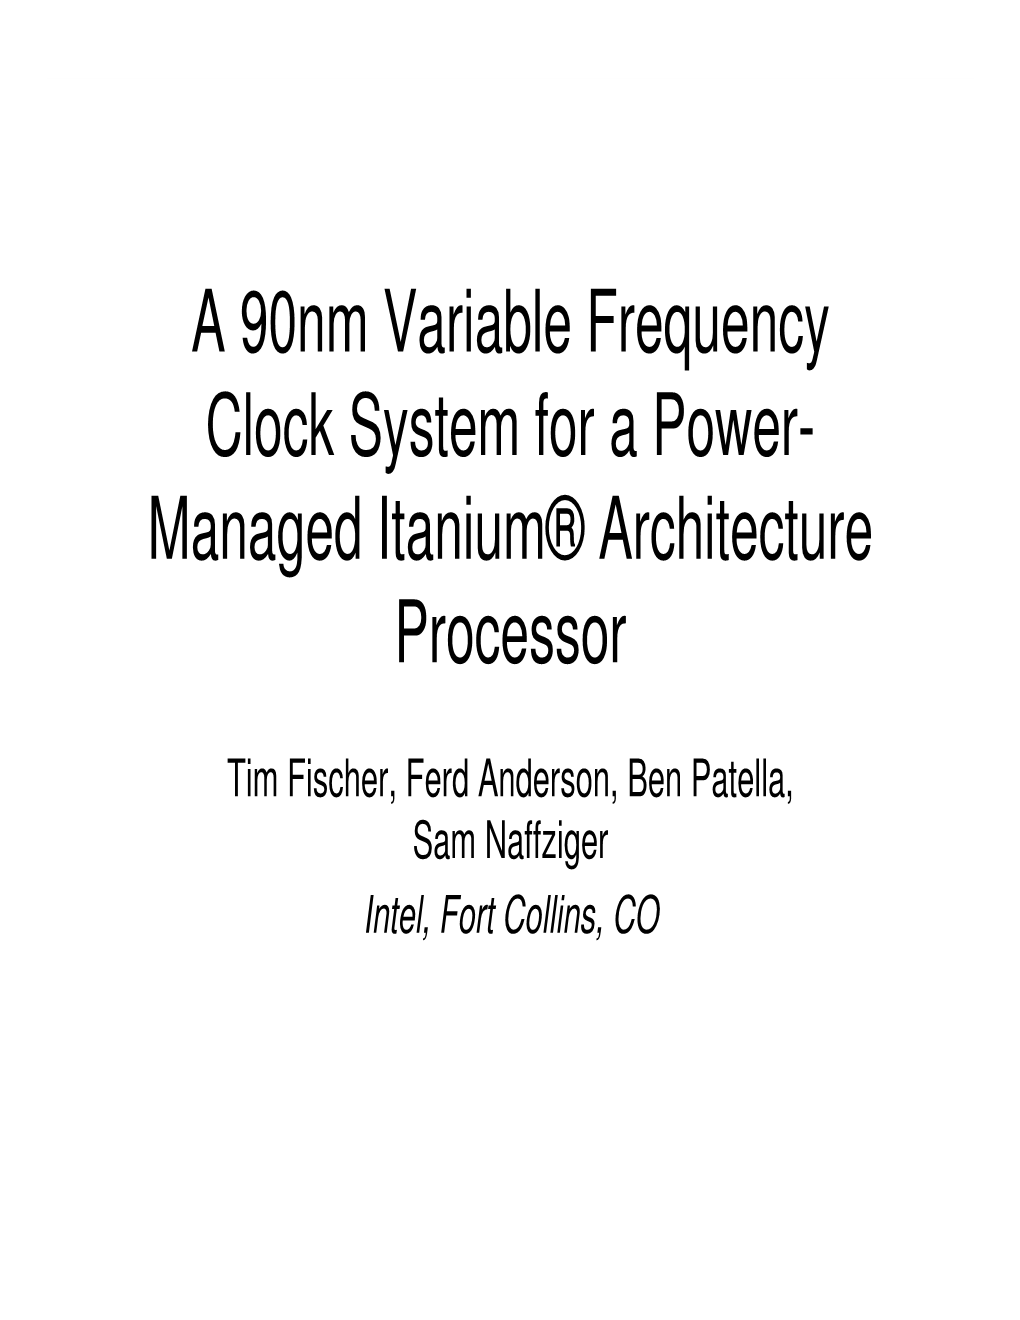 A 90Nm Variable Frequency Clock System for a Power- Managed Itanium® Architecture Processor